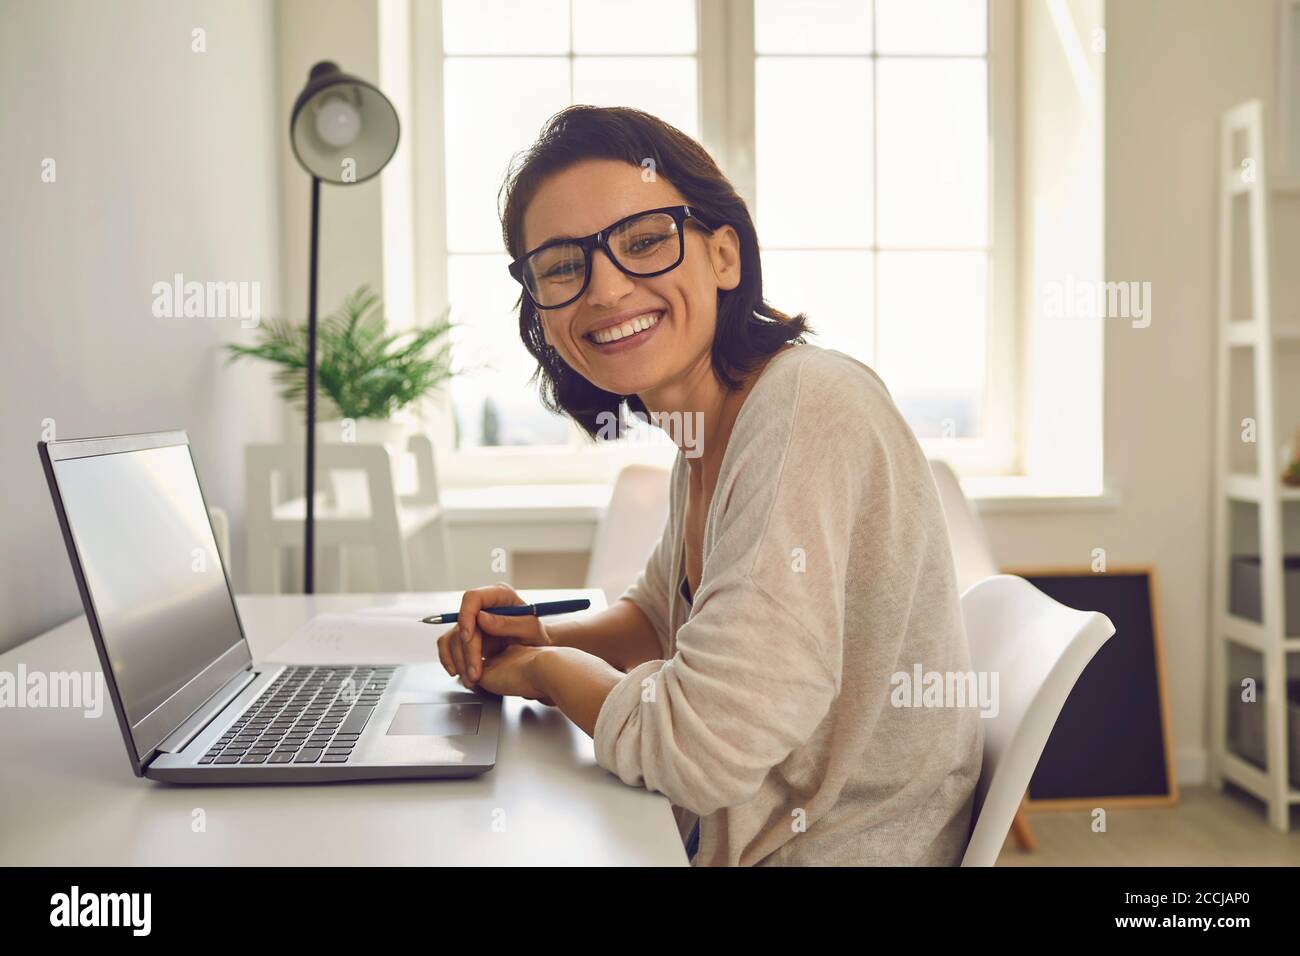 Working from home. Businesswoman taking part in online conference from home office. Happy freelancer using laptop Stock Photo